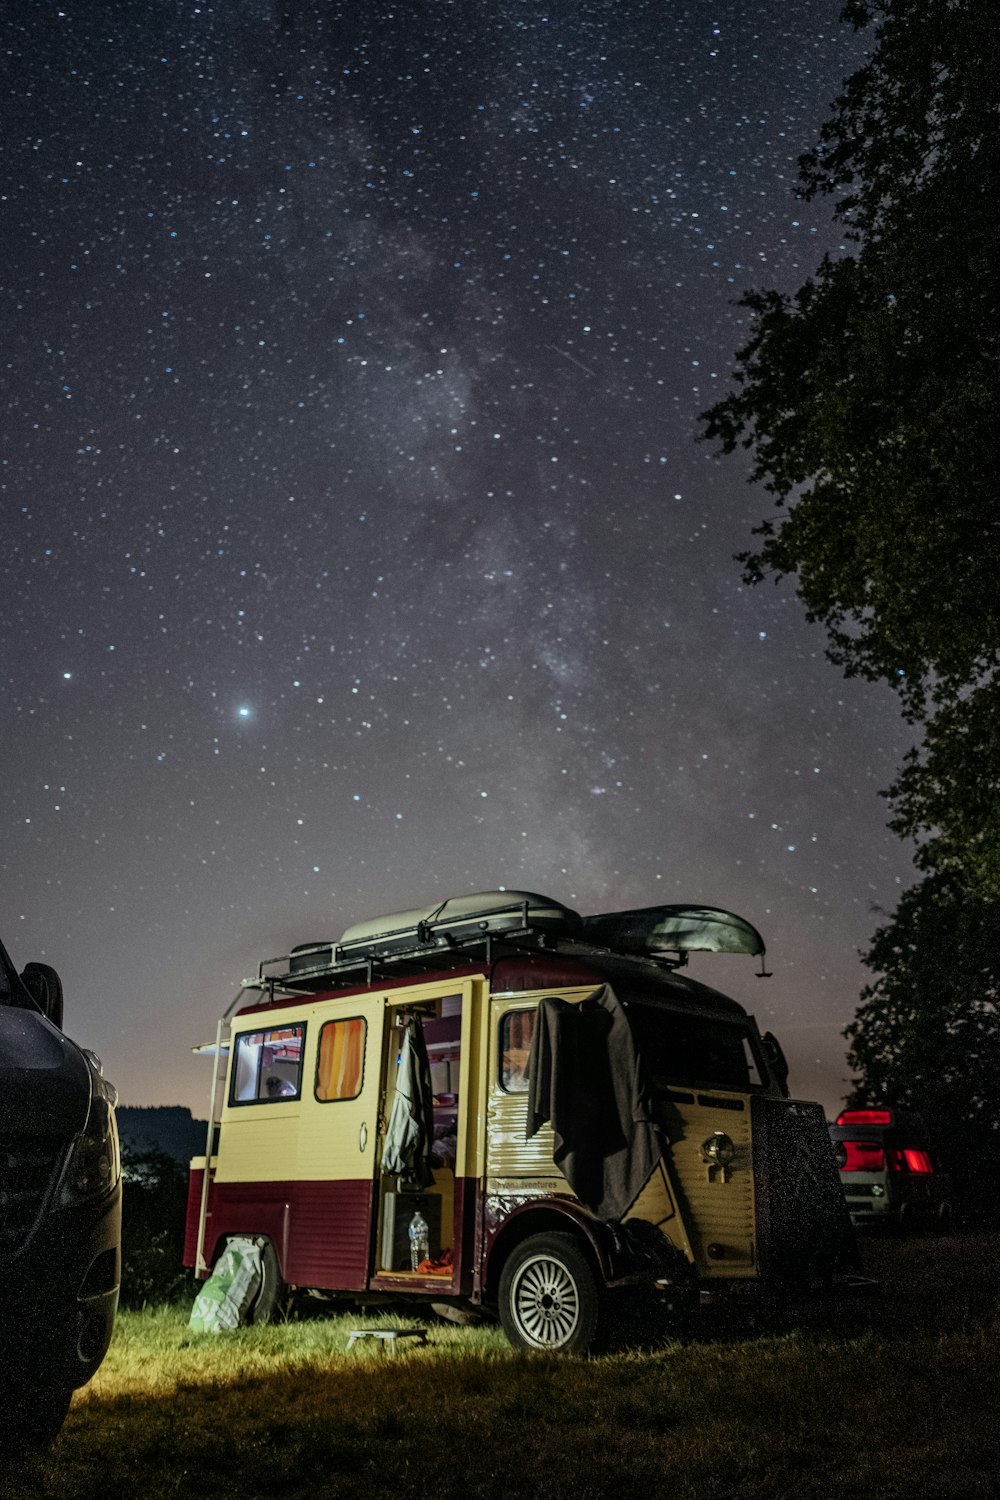 red and white bus under starry night